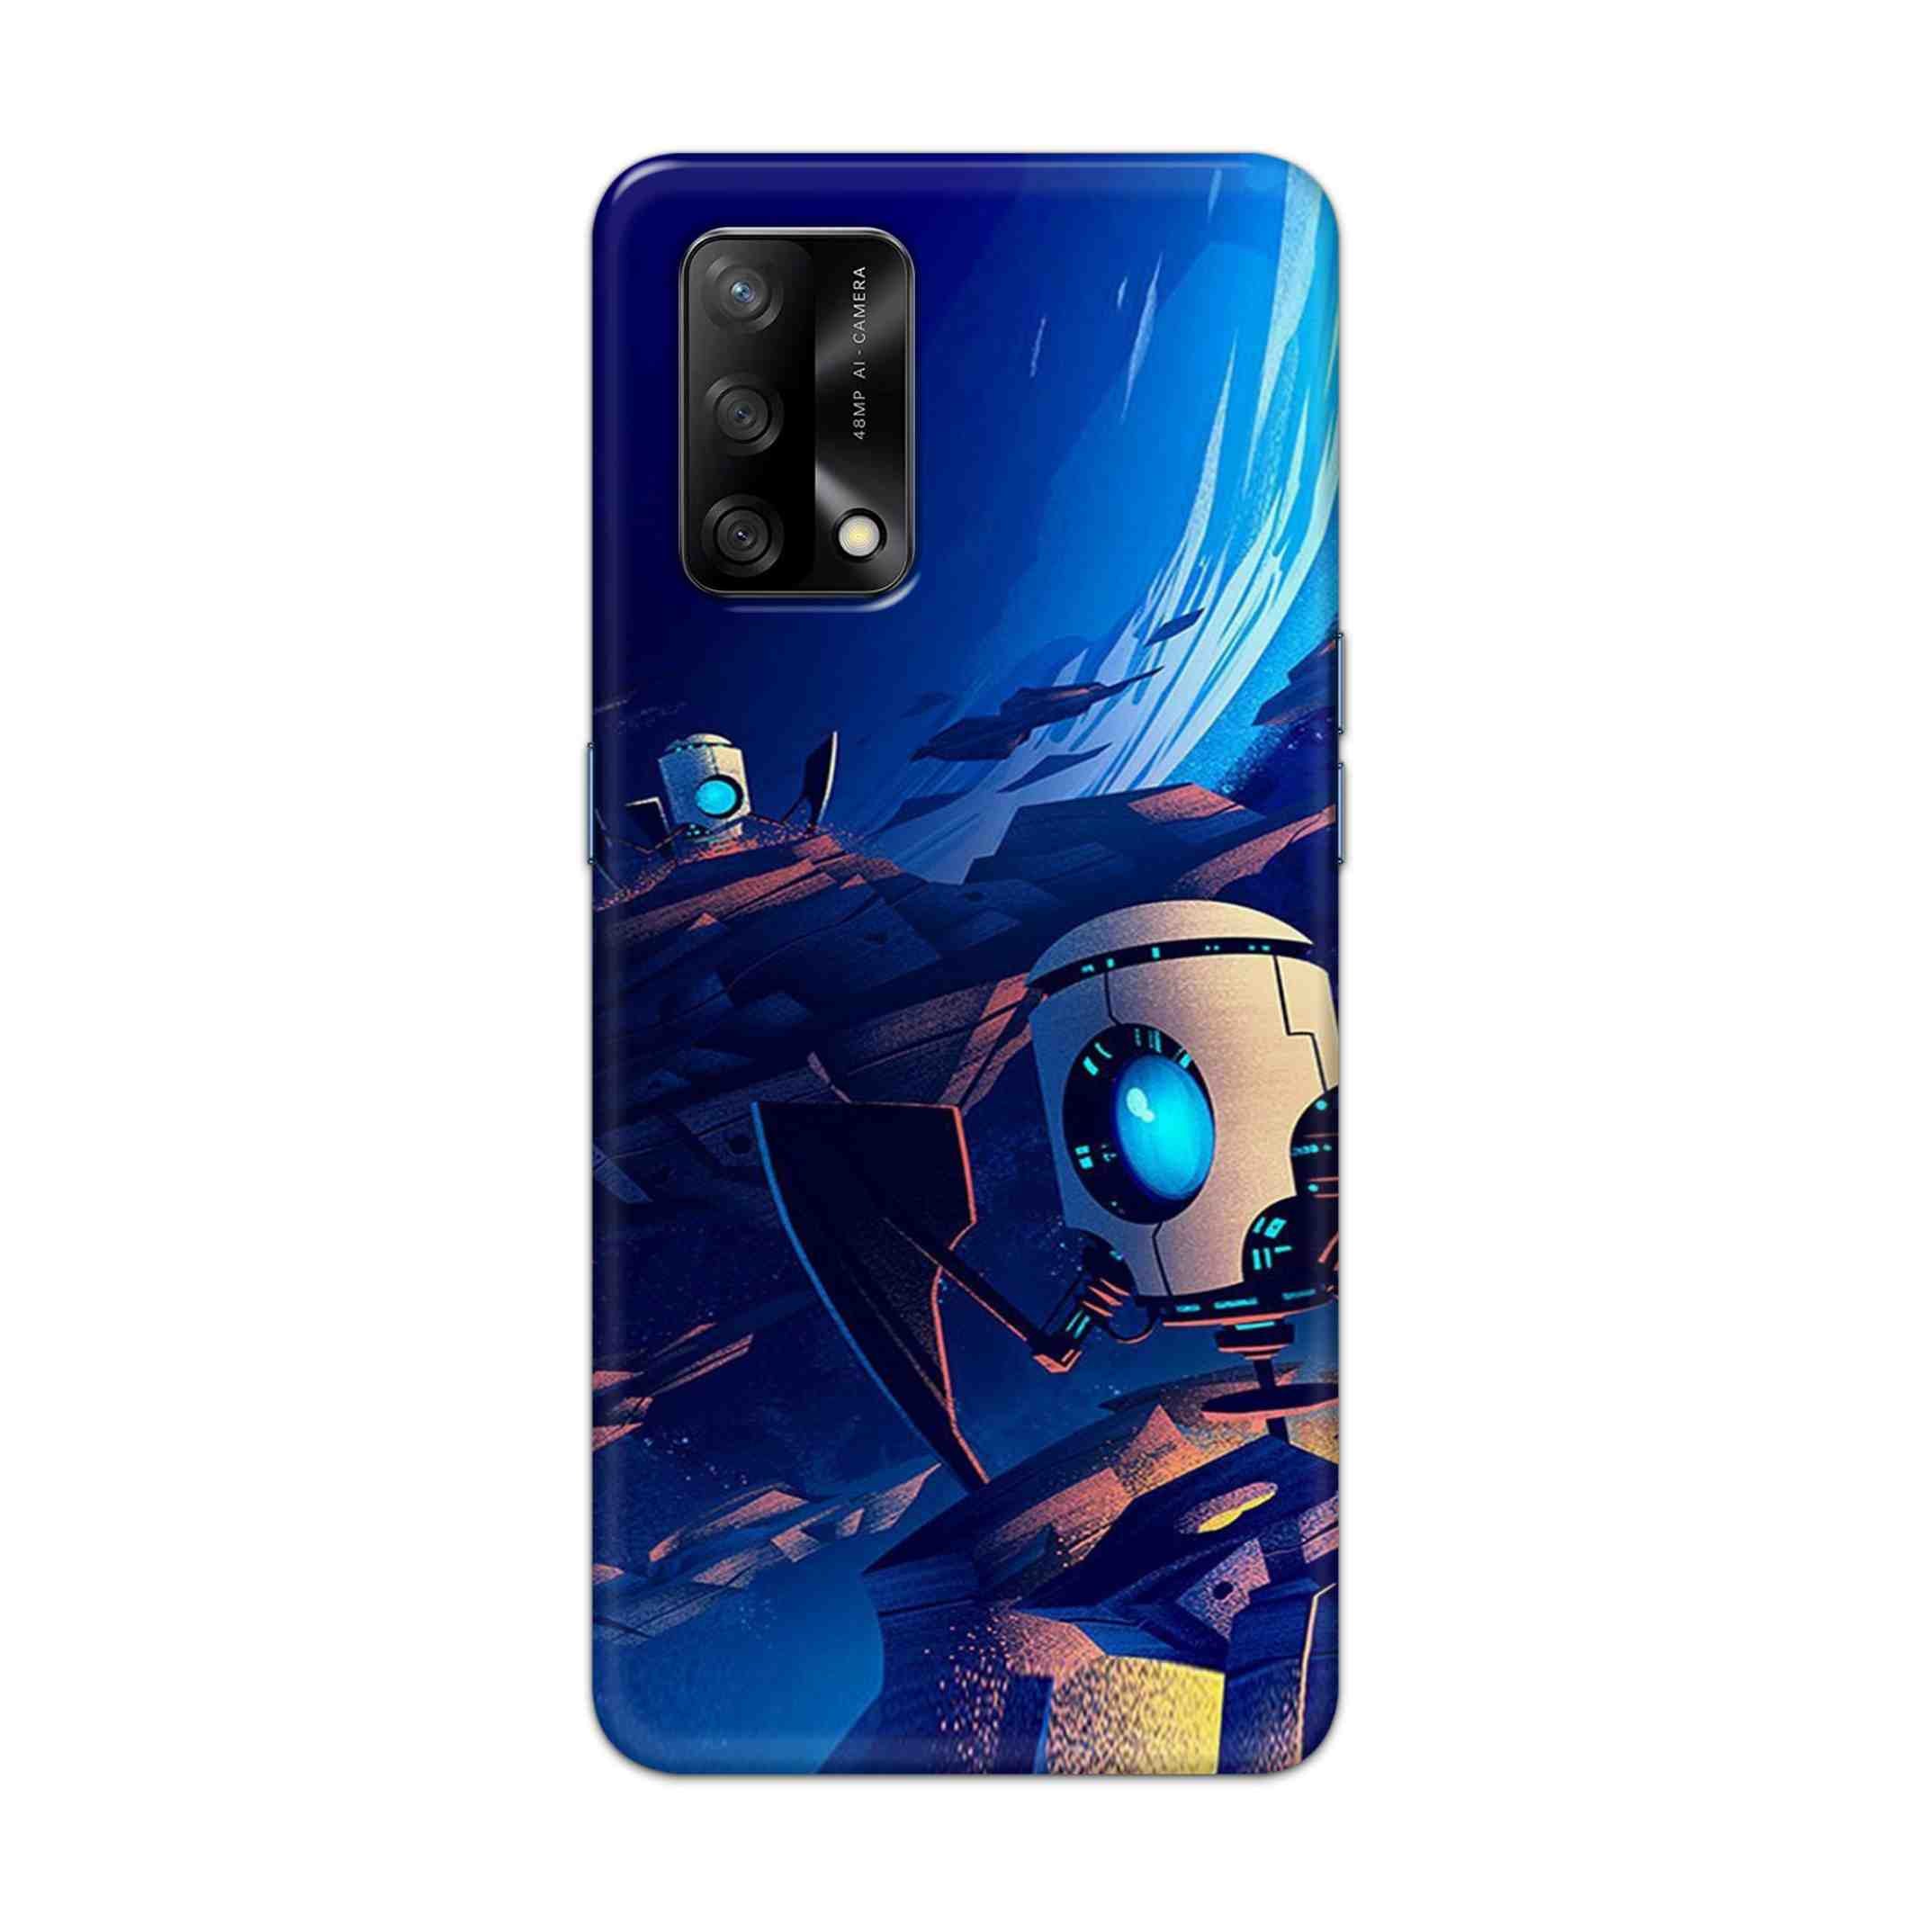 Buy Spaceship Robot Hard Back Mobile Phone Case Cover For Oppo F19 Online